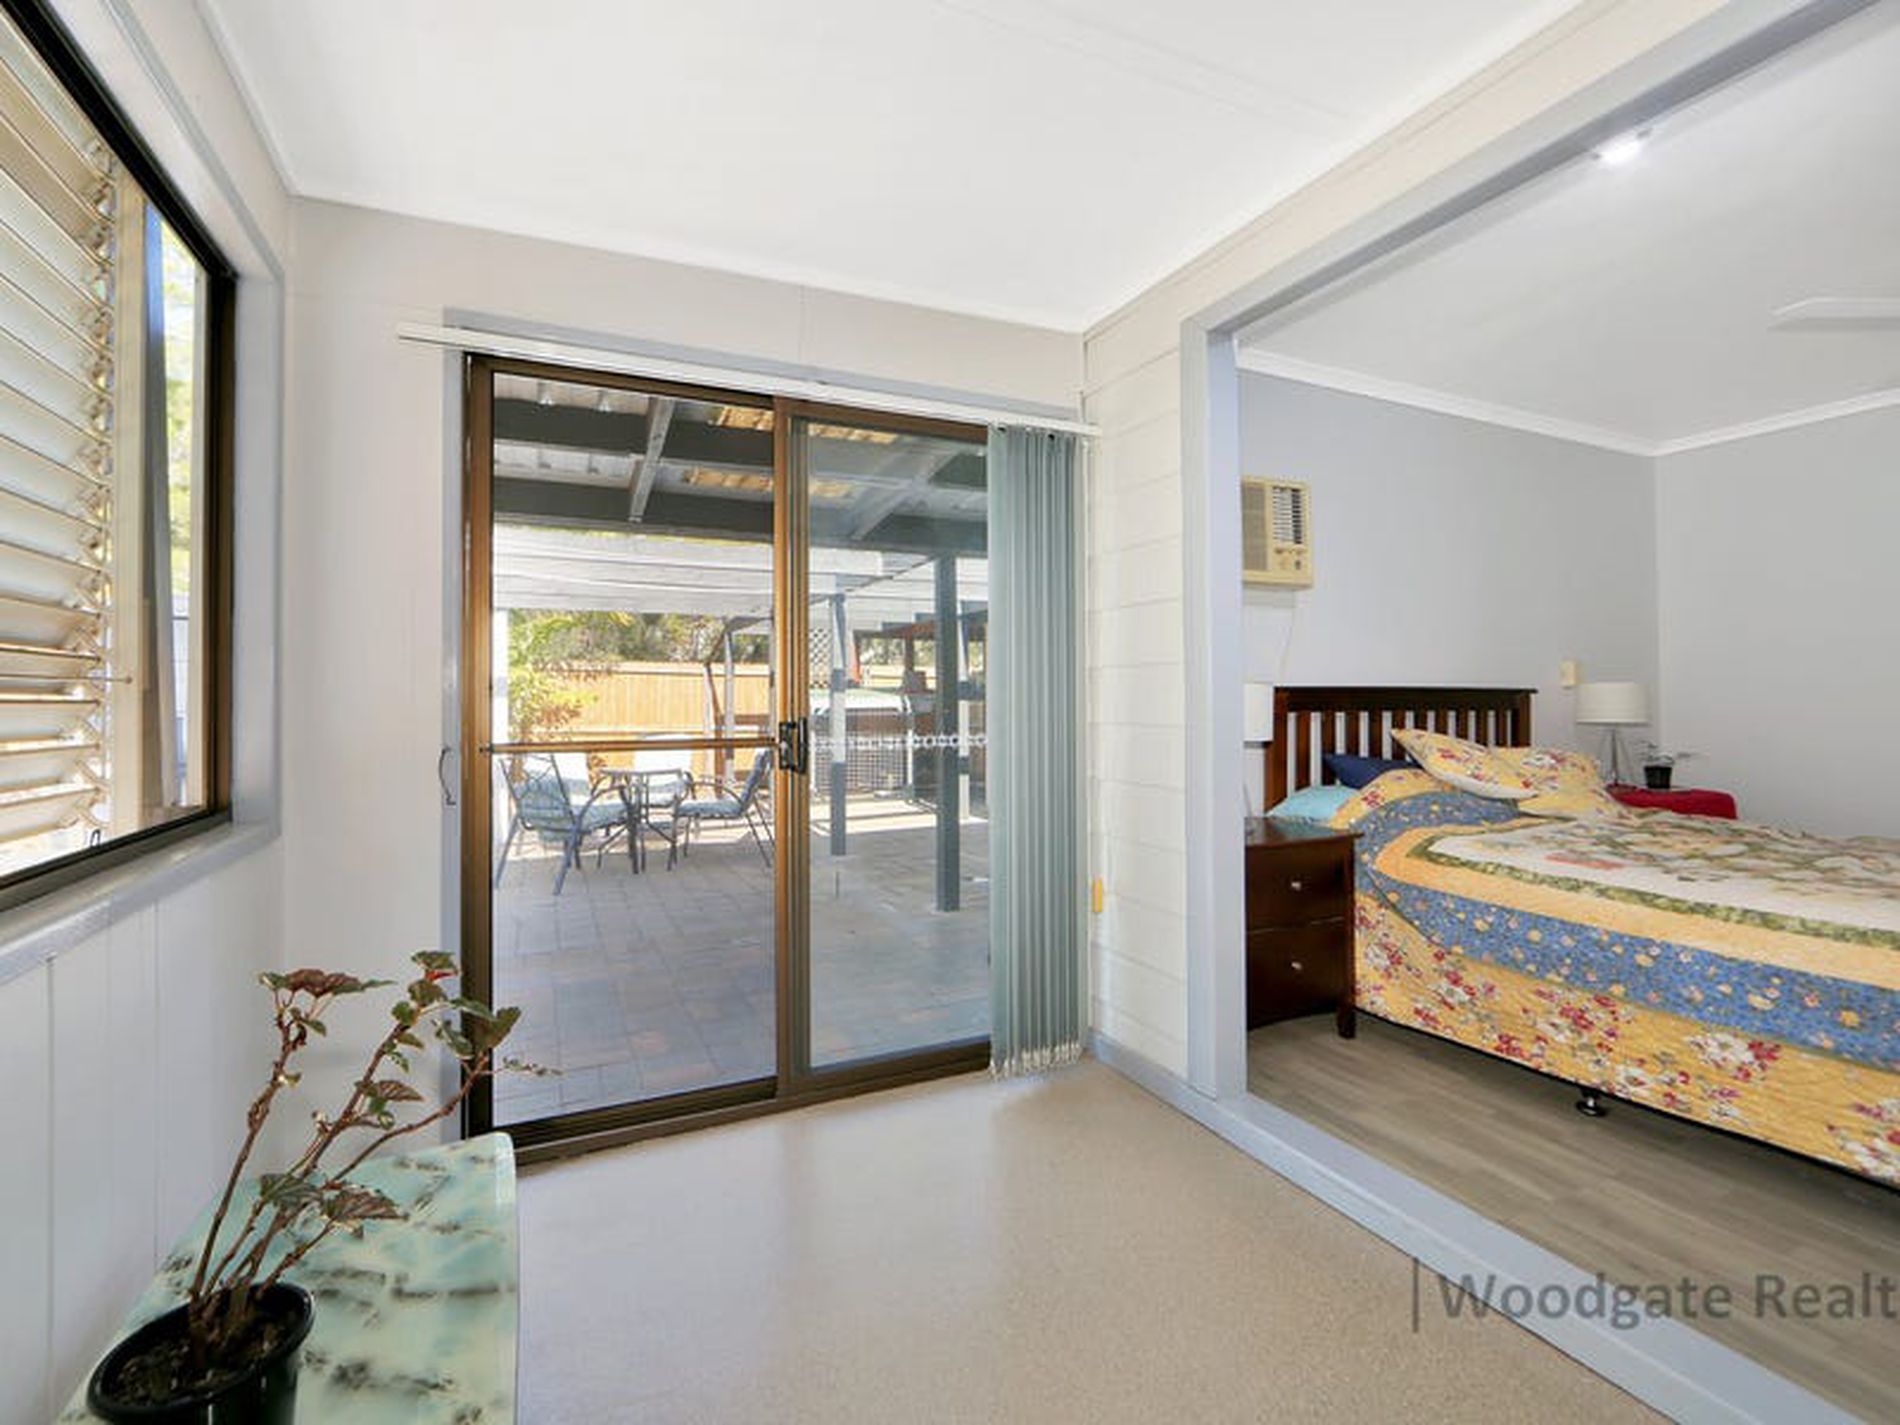 42 First Ave, Woodgate